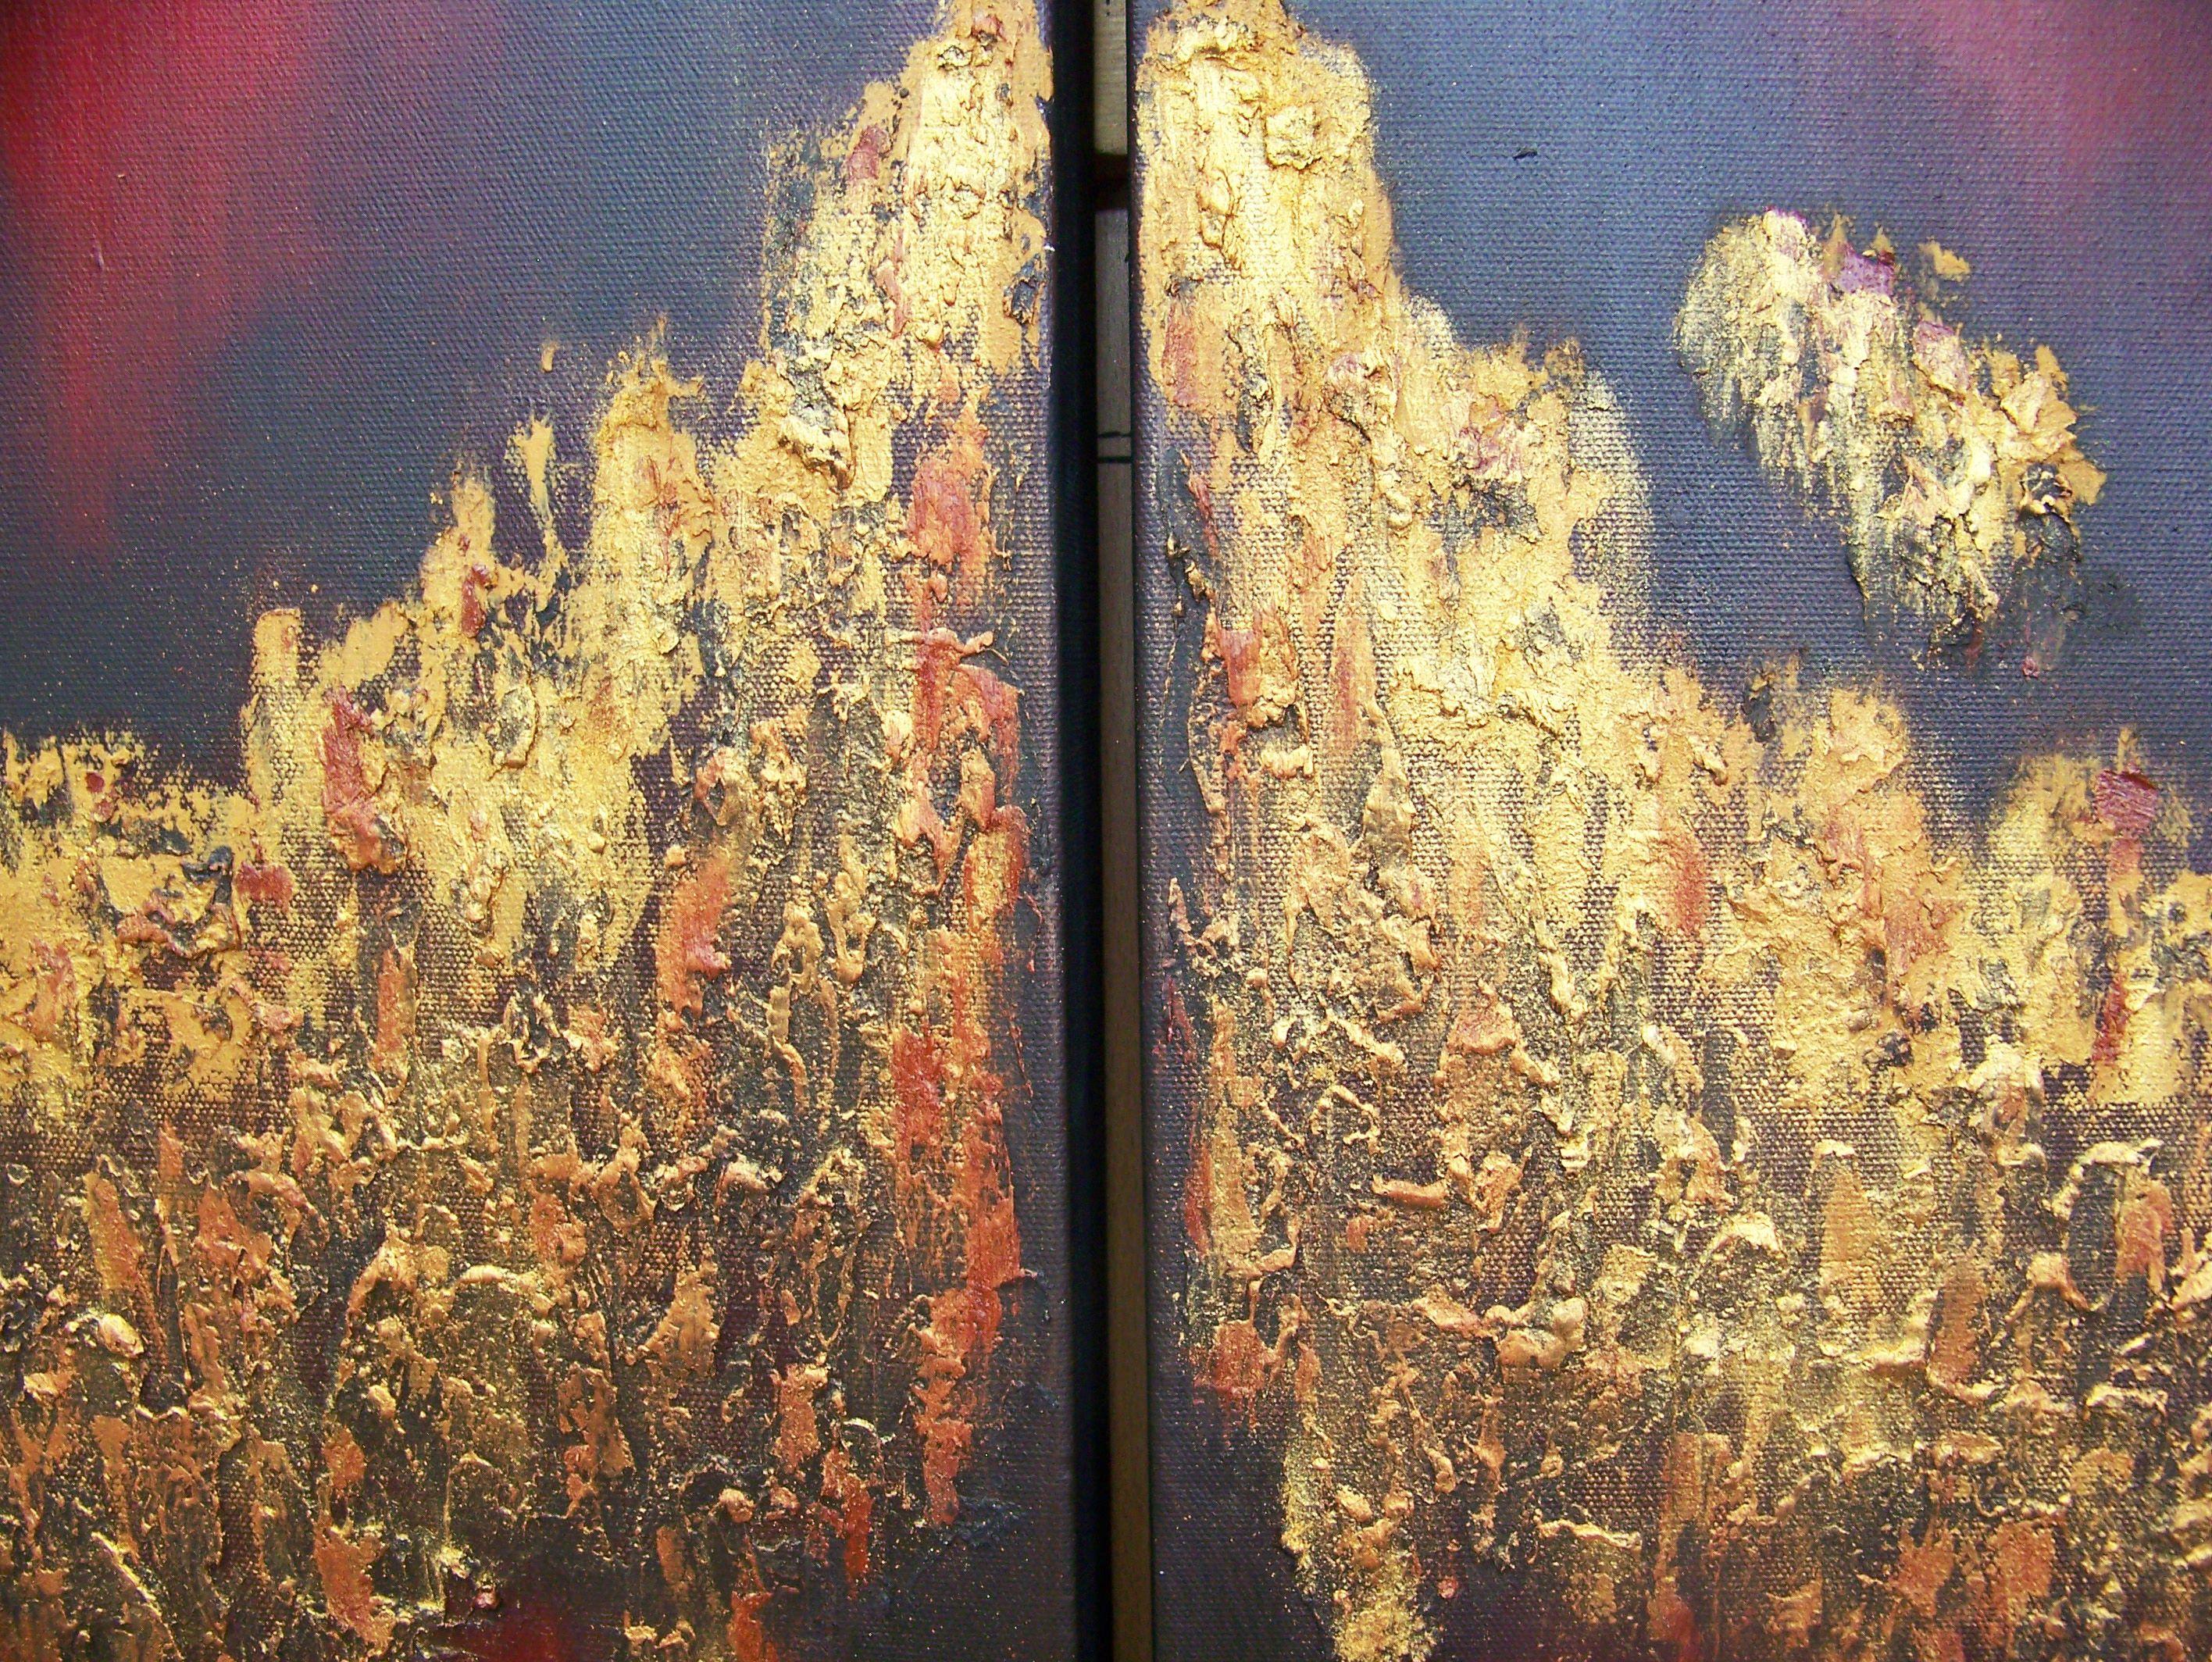 quadtych paintings